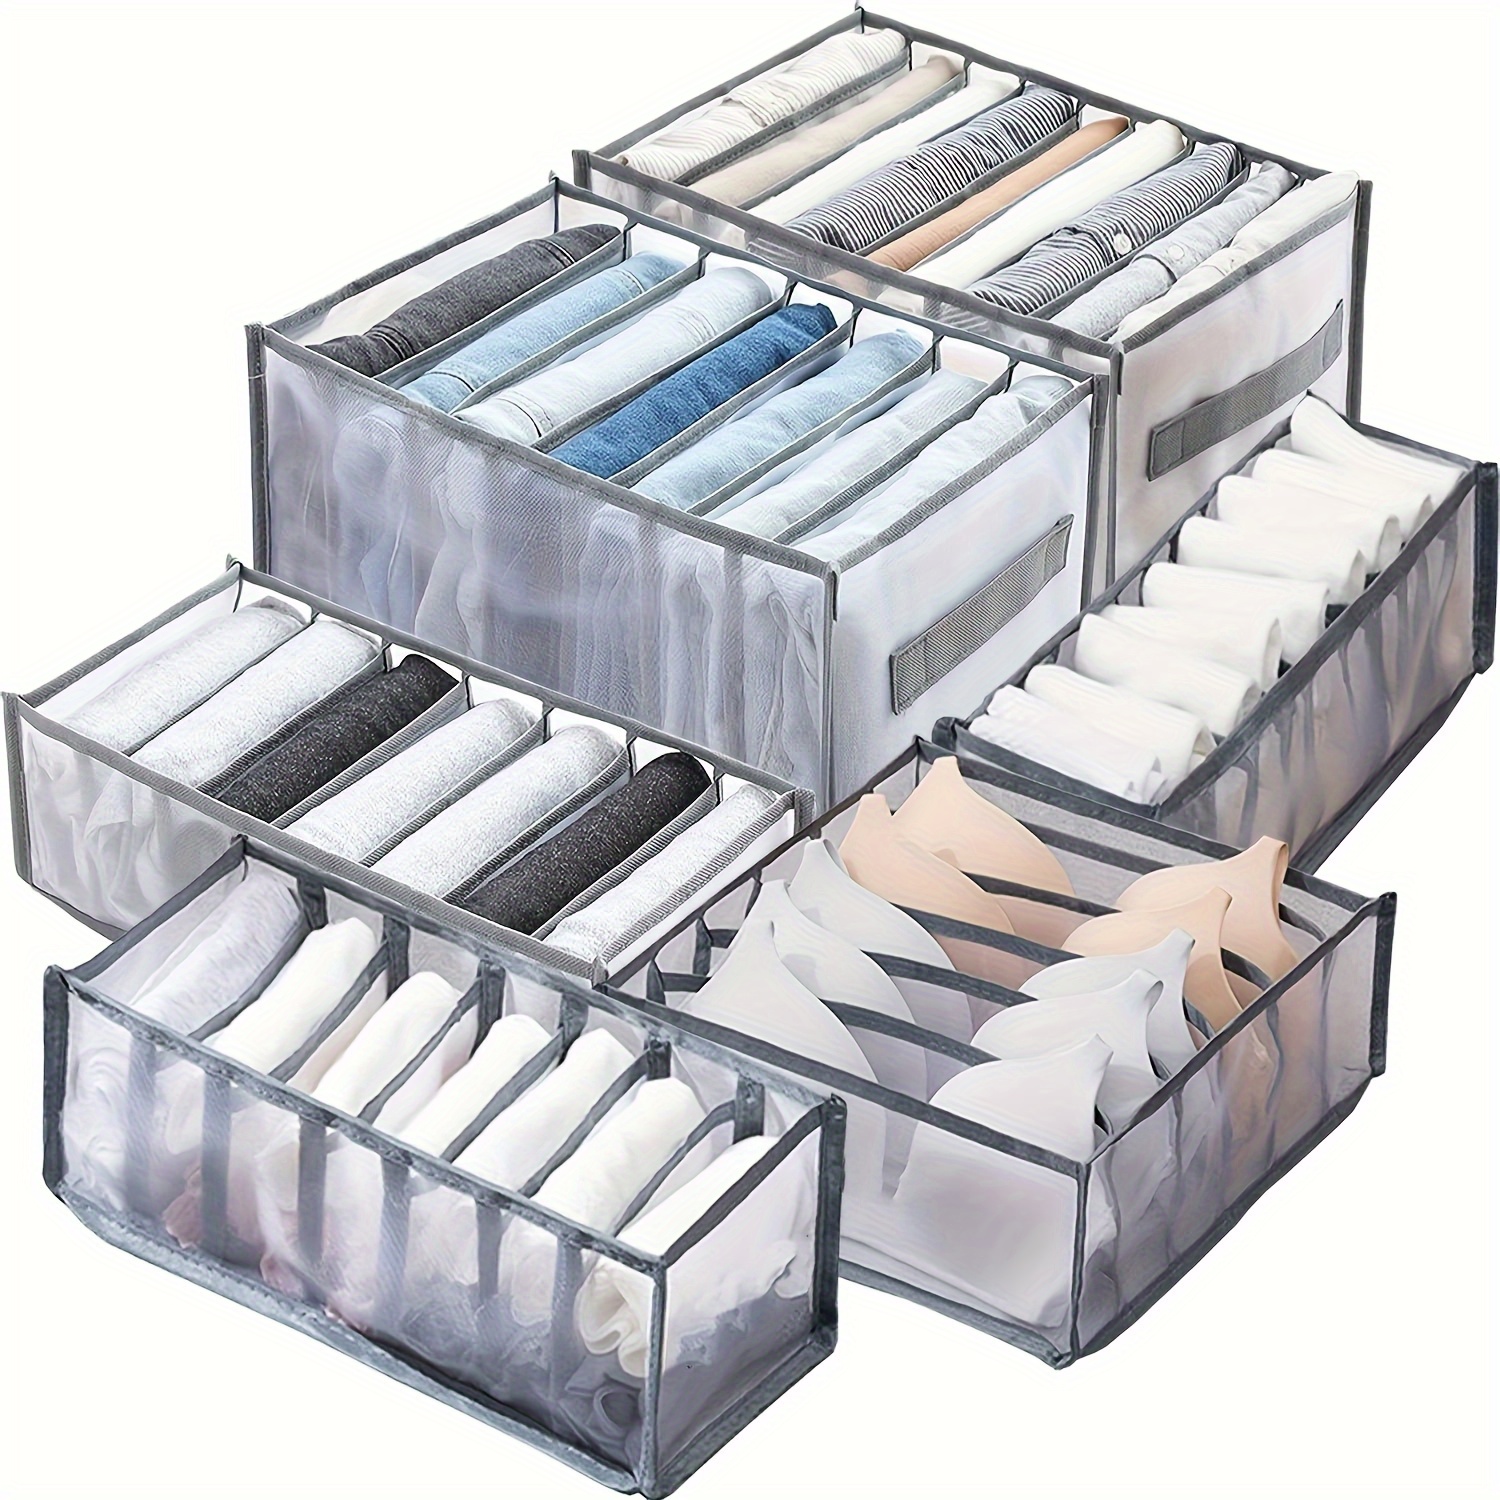 

6-piece Foldable Clothes Organizer Set With Handles - Durable, Mold-resistant Fabric Drawer Dividers For Jeans, Shirts, Underwear & Socks - Gray